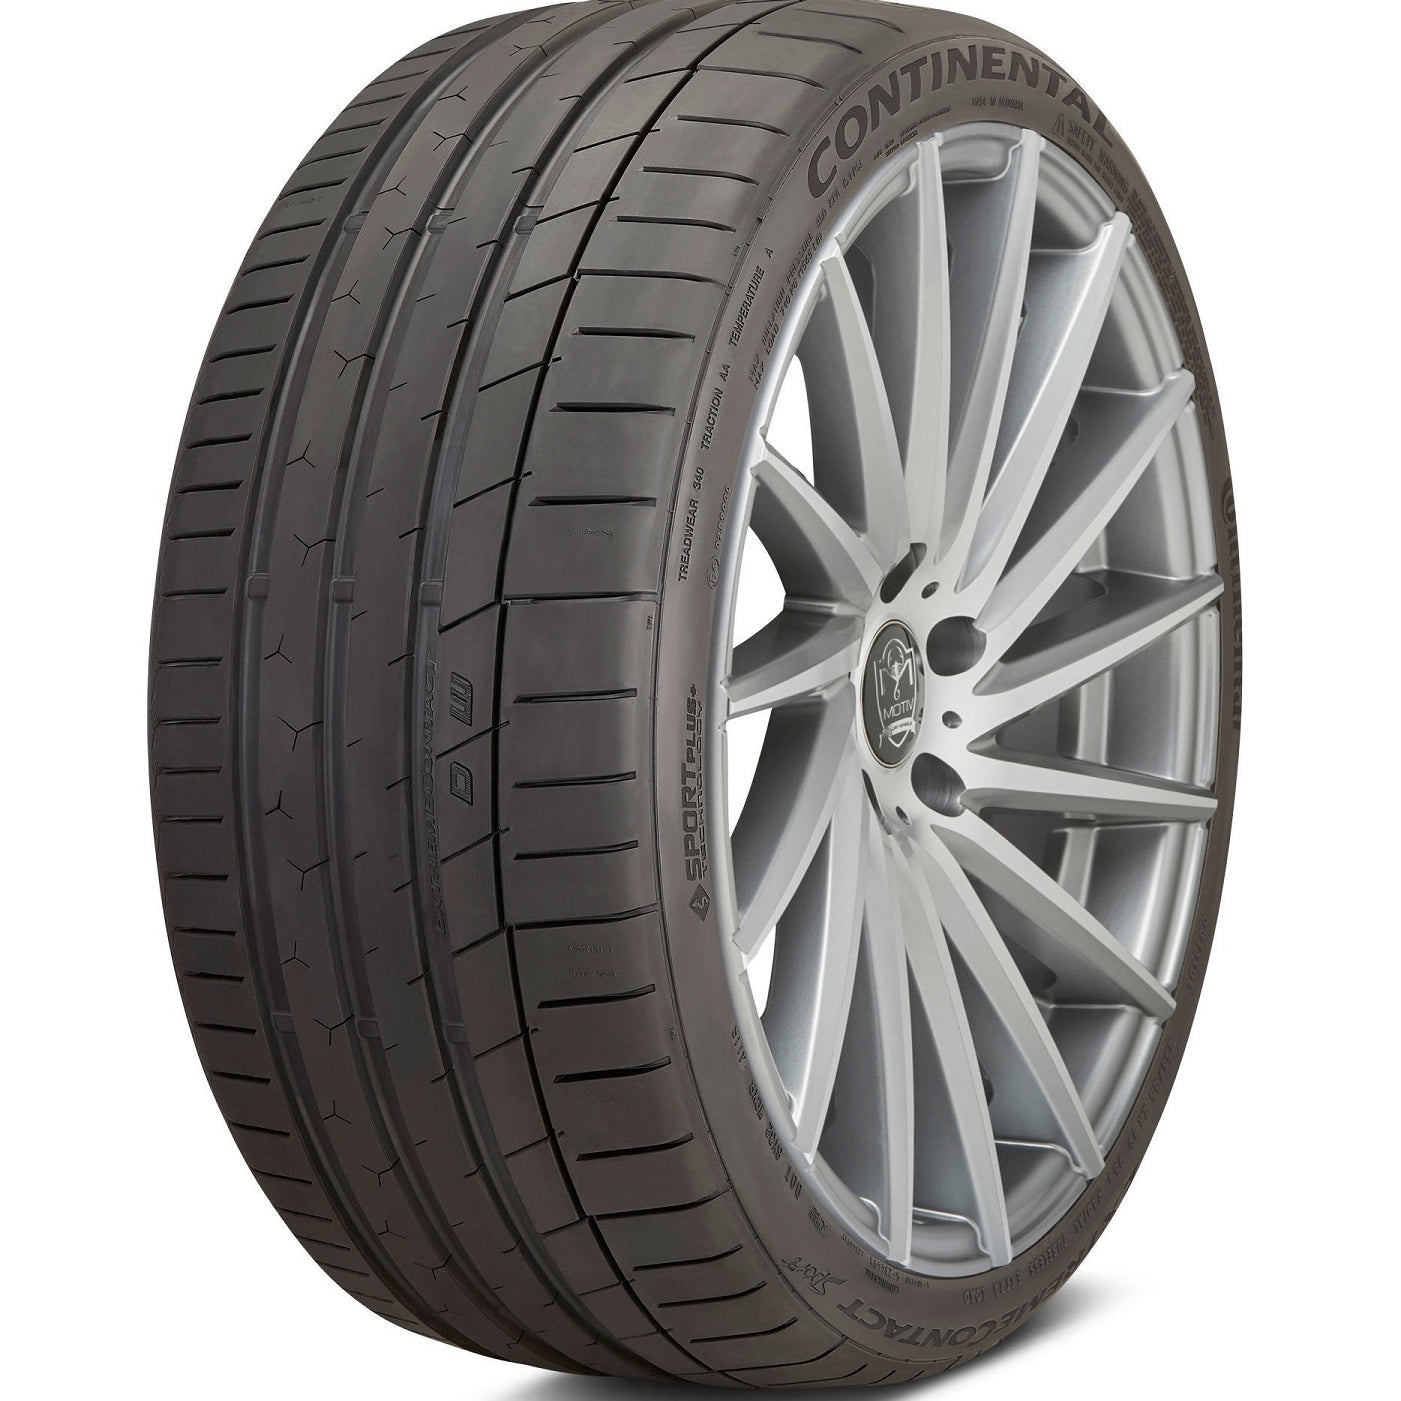 CONTINENTAL EXTREMECONTACT SPORT 205/55ZR16 (24.9X8.1R 16) Tires